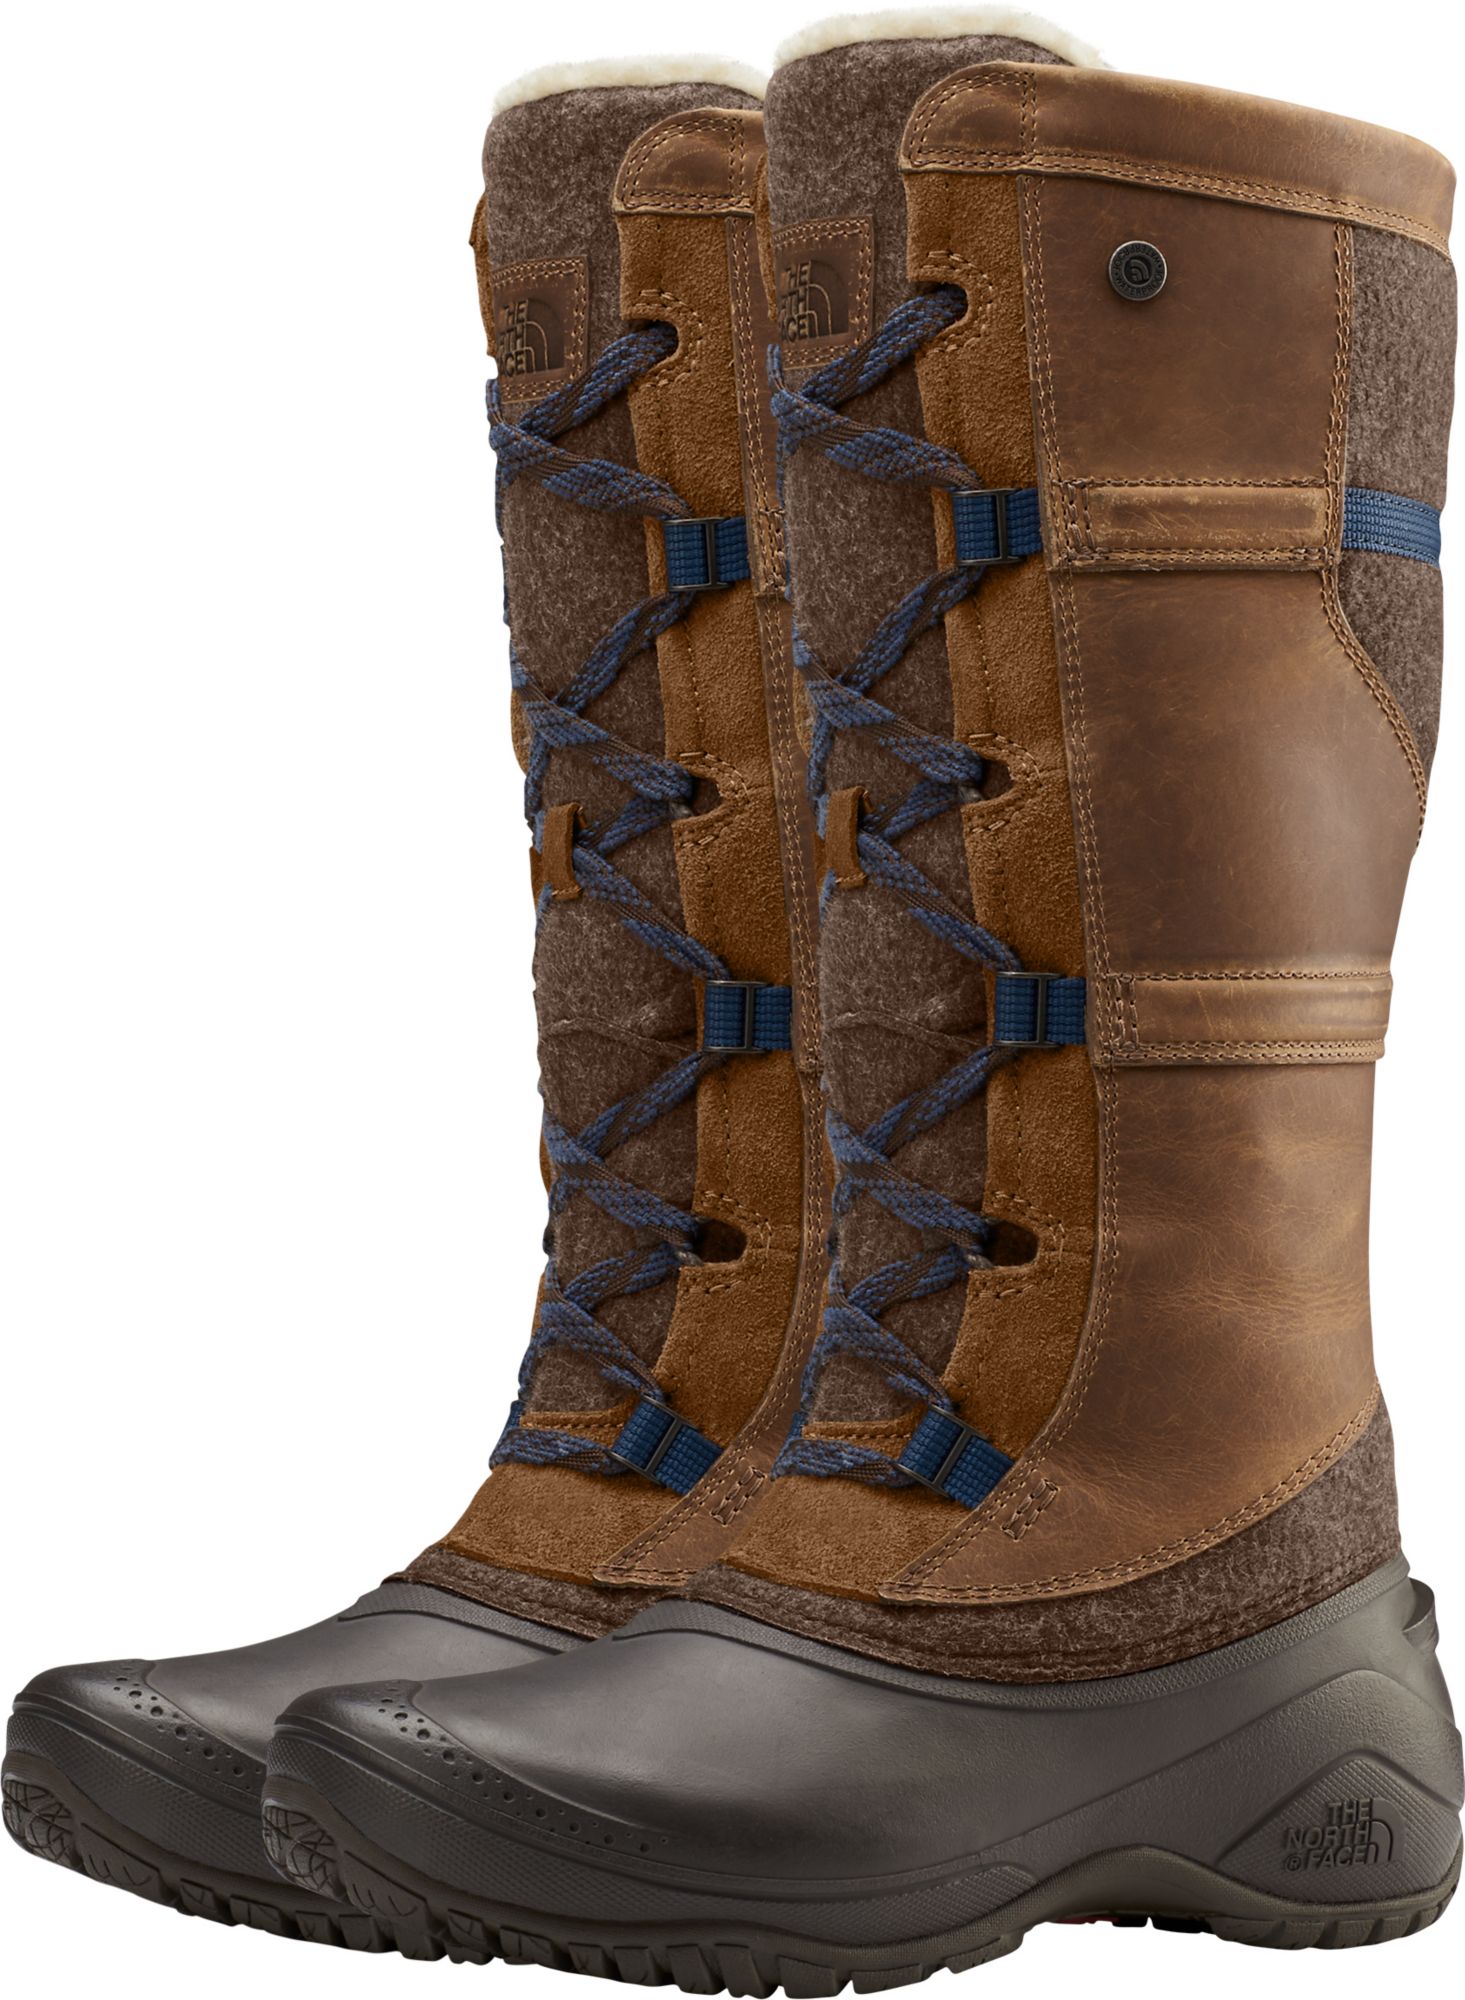 north face women's tall winter boots